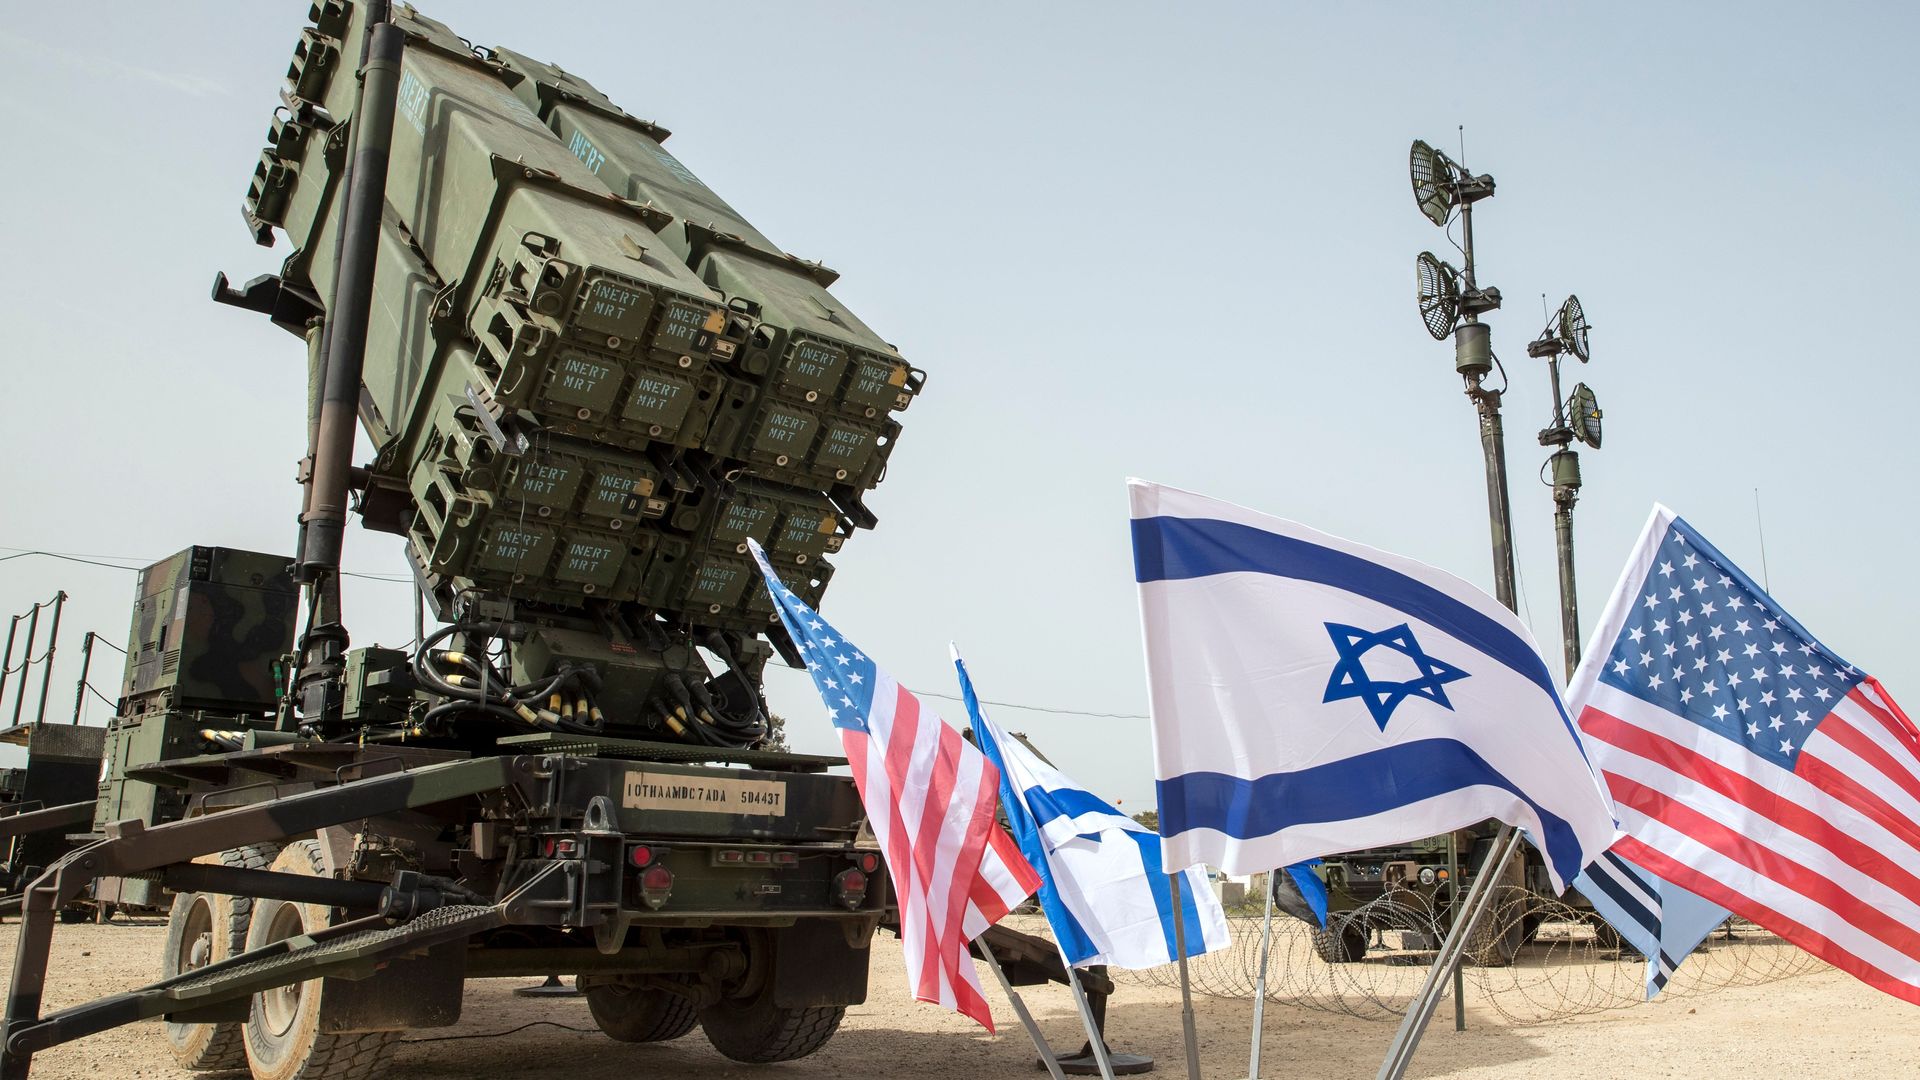 A US Patriot missile defense system during a joint Israeli-US military exercise